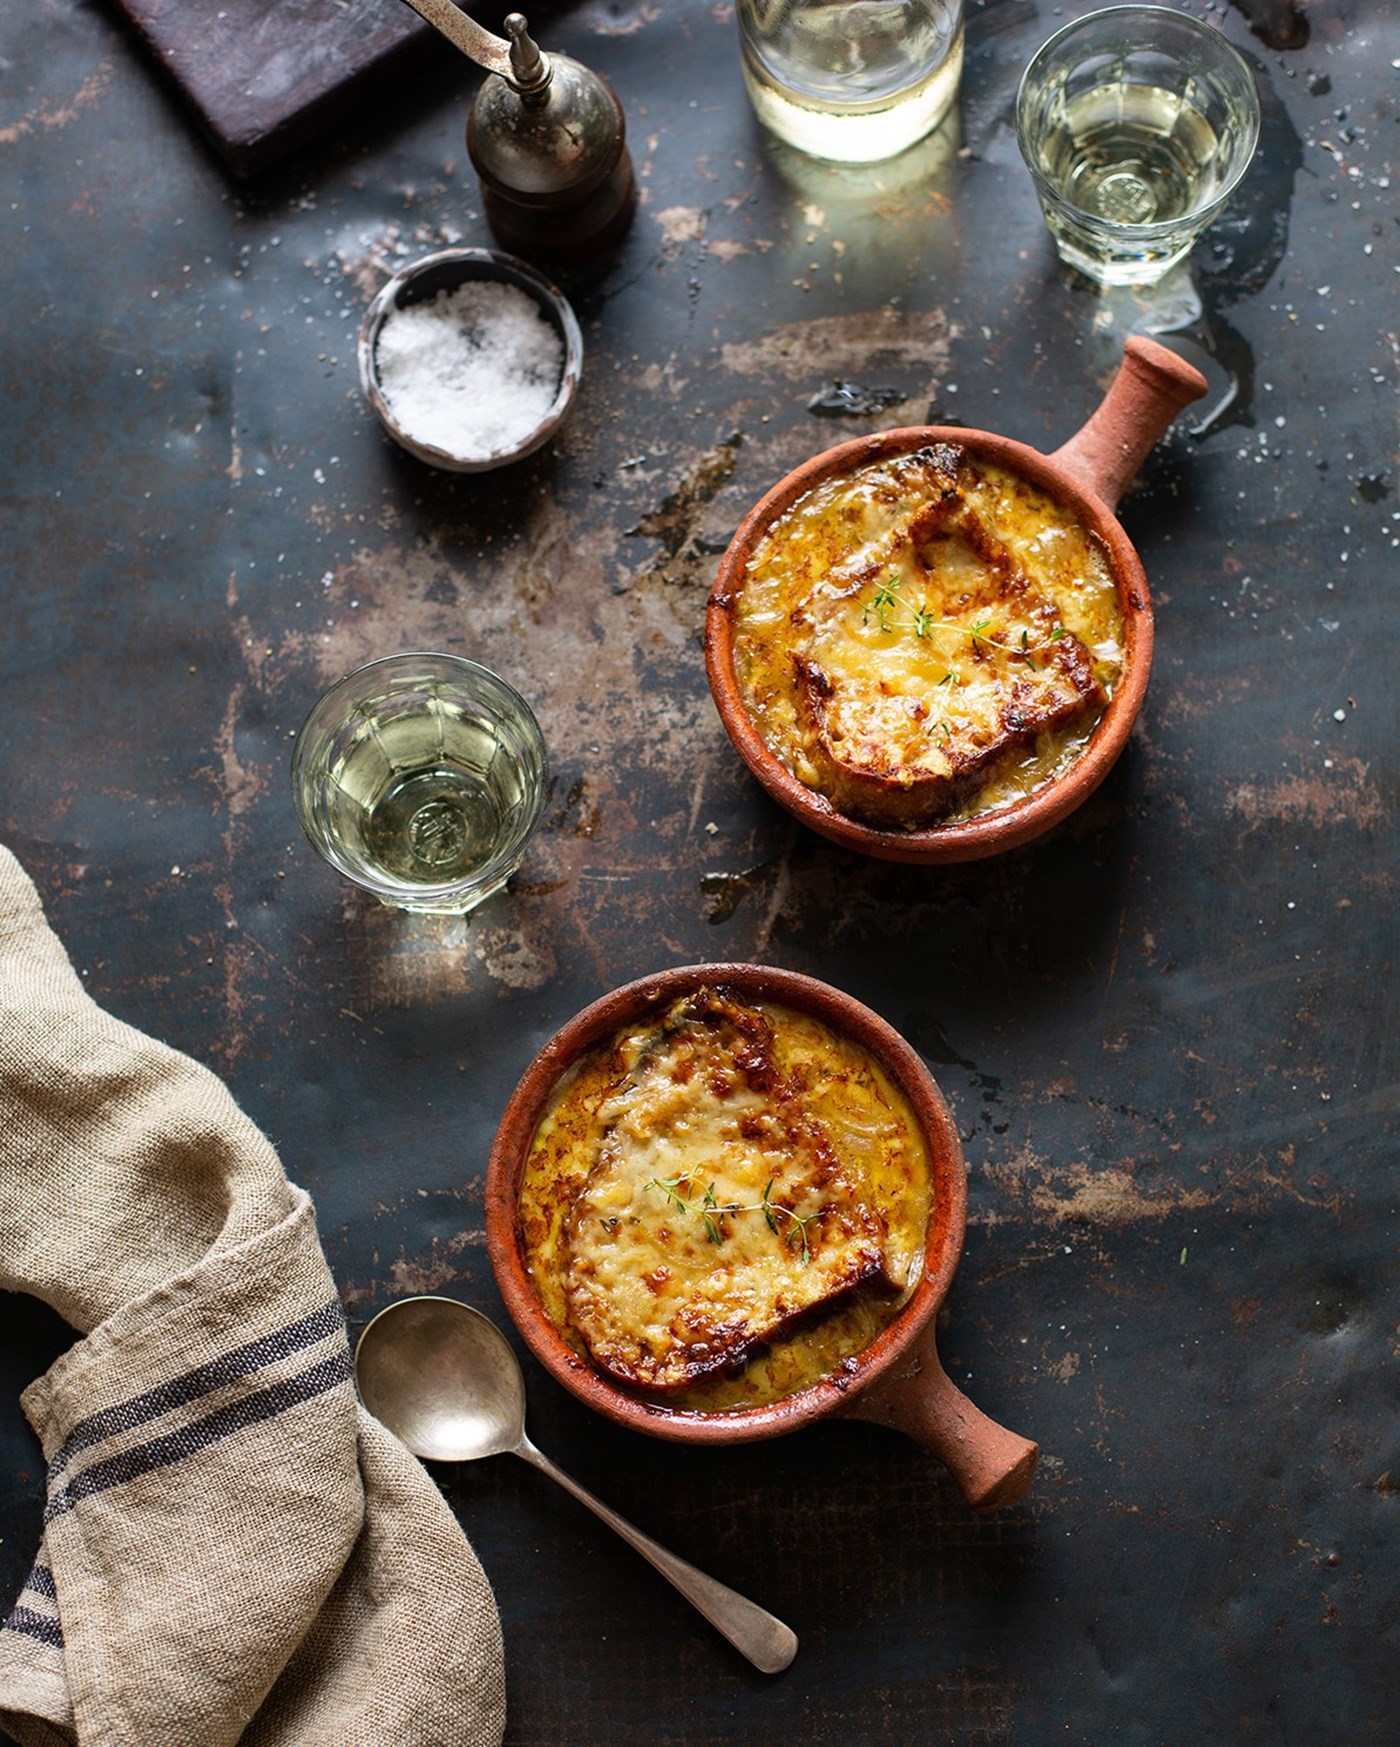 French Onion Soup Recipe (Credit: Drizzle and Dip)